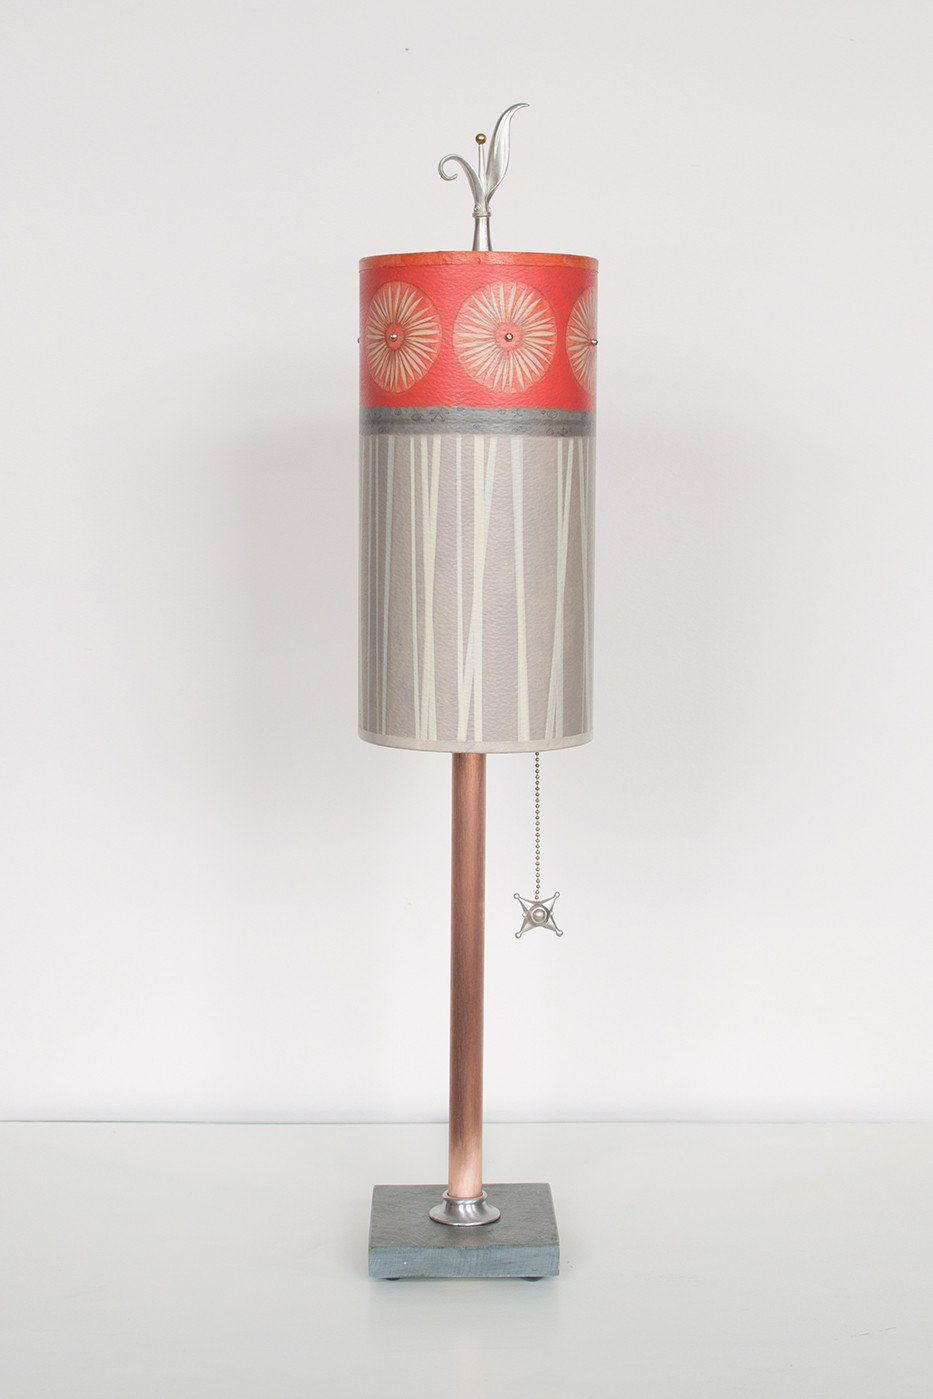 Janna Ugone & Co Table Lamps Copper Table Lamp with Small Tube Shade in Tang